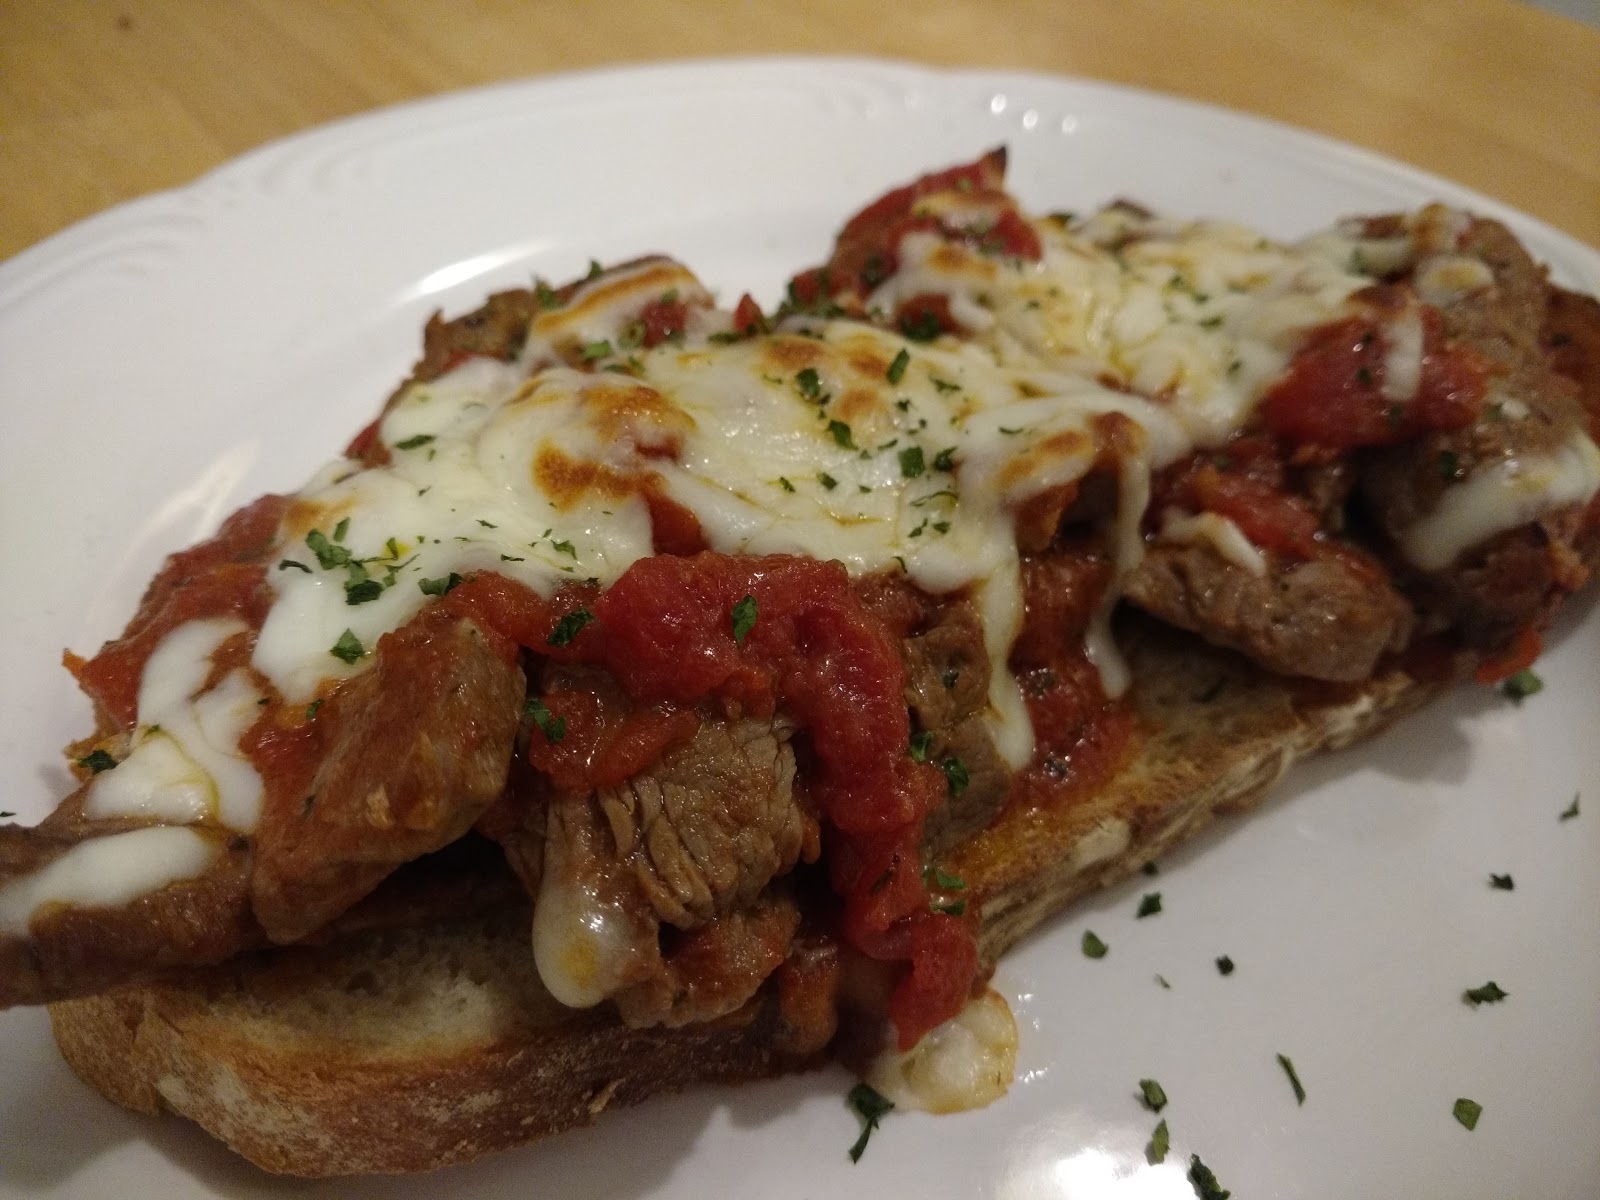 &amp;quot;So what are you making for dinner?&amp;quot;: Steak Pizzaiola on Ciabatta